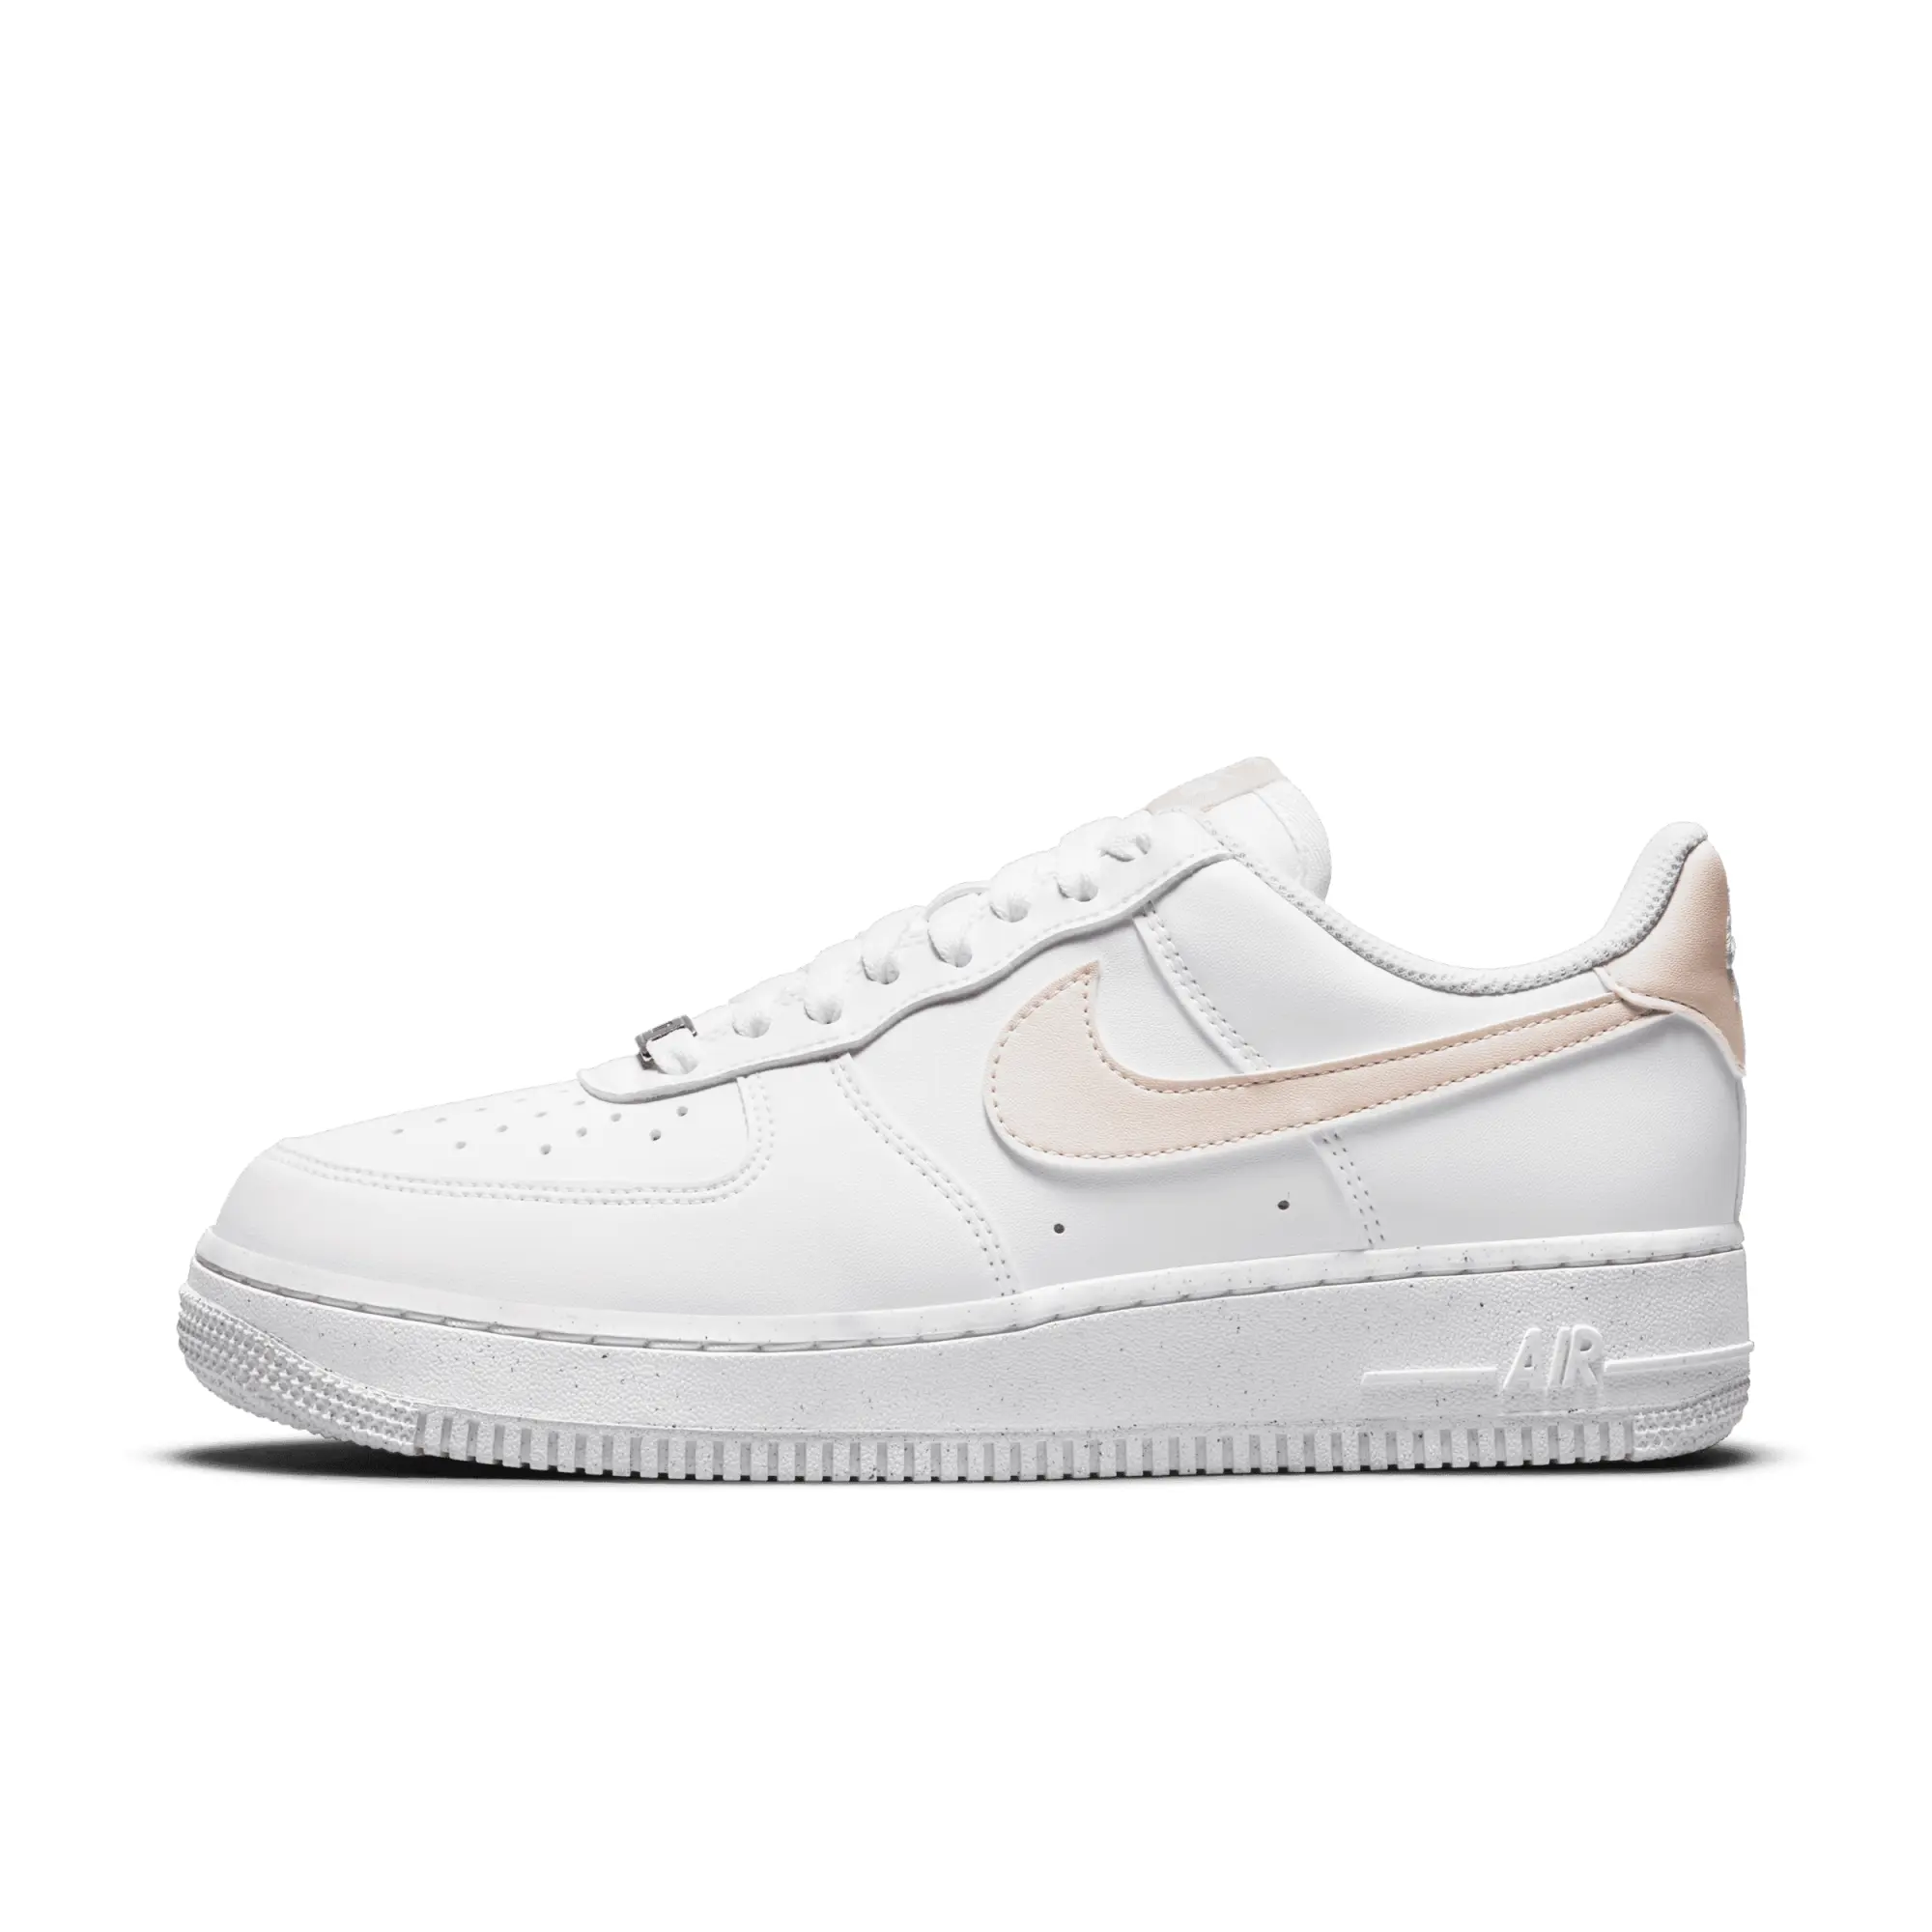 Nike Air Force 1 '07 Essential Trainers In White And Coral Pink - Pink